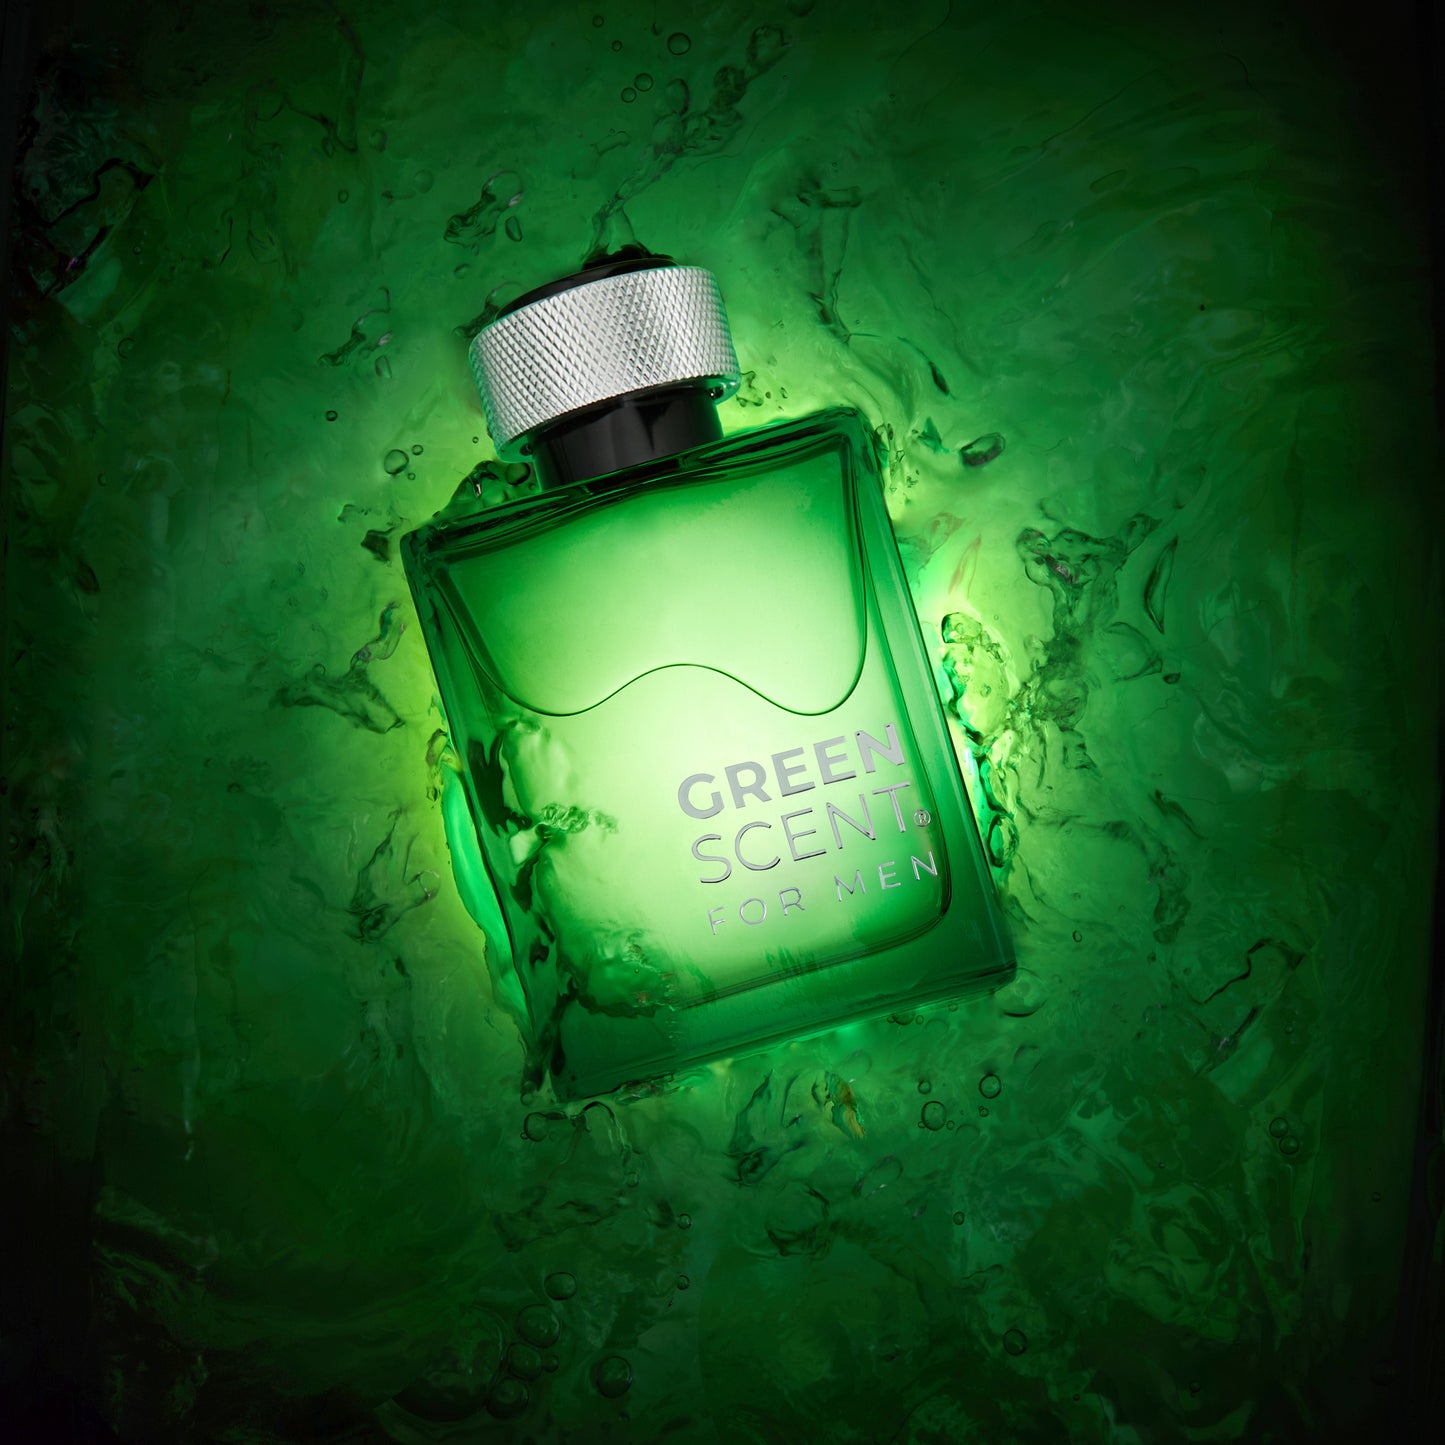 Green Scent